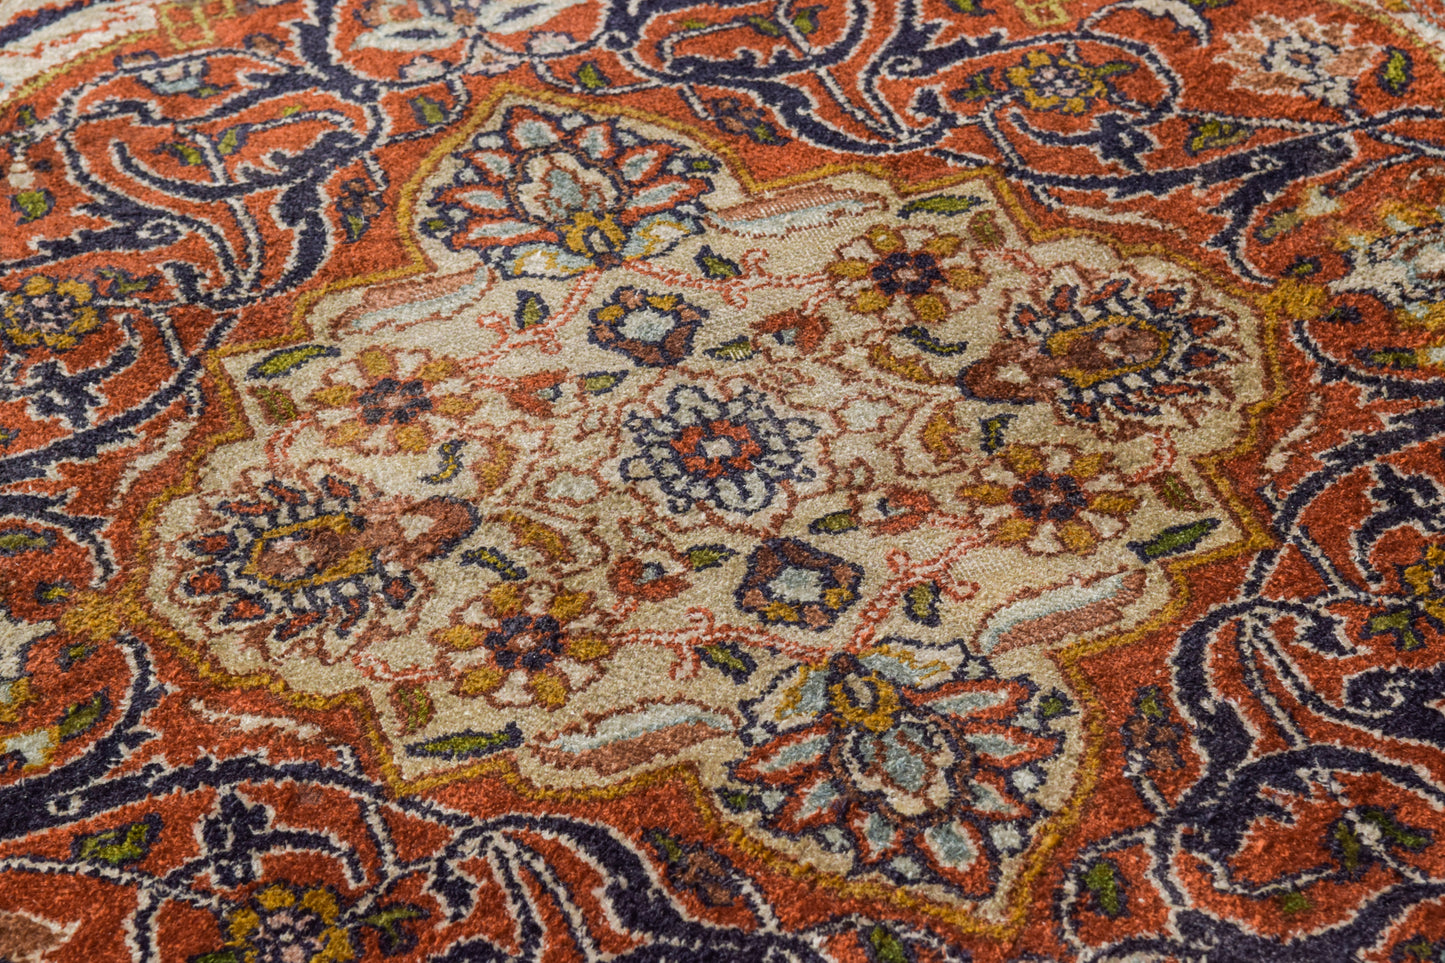 Handwoven Medallion Rug - With Flowers